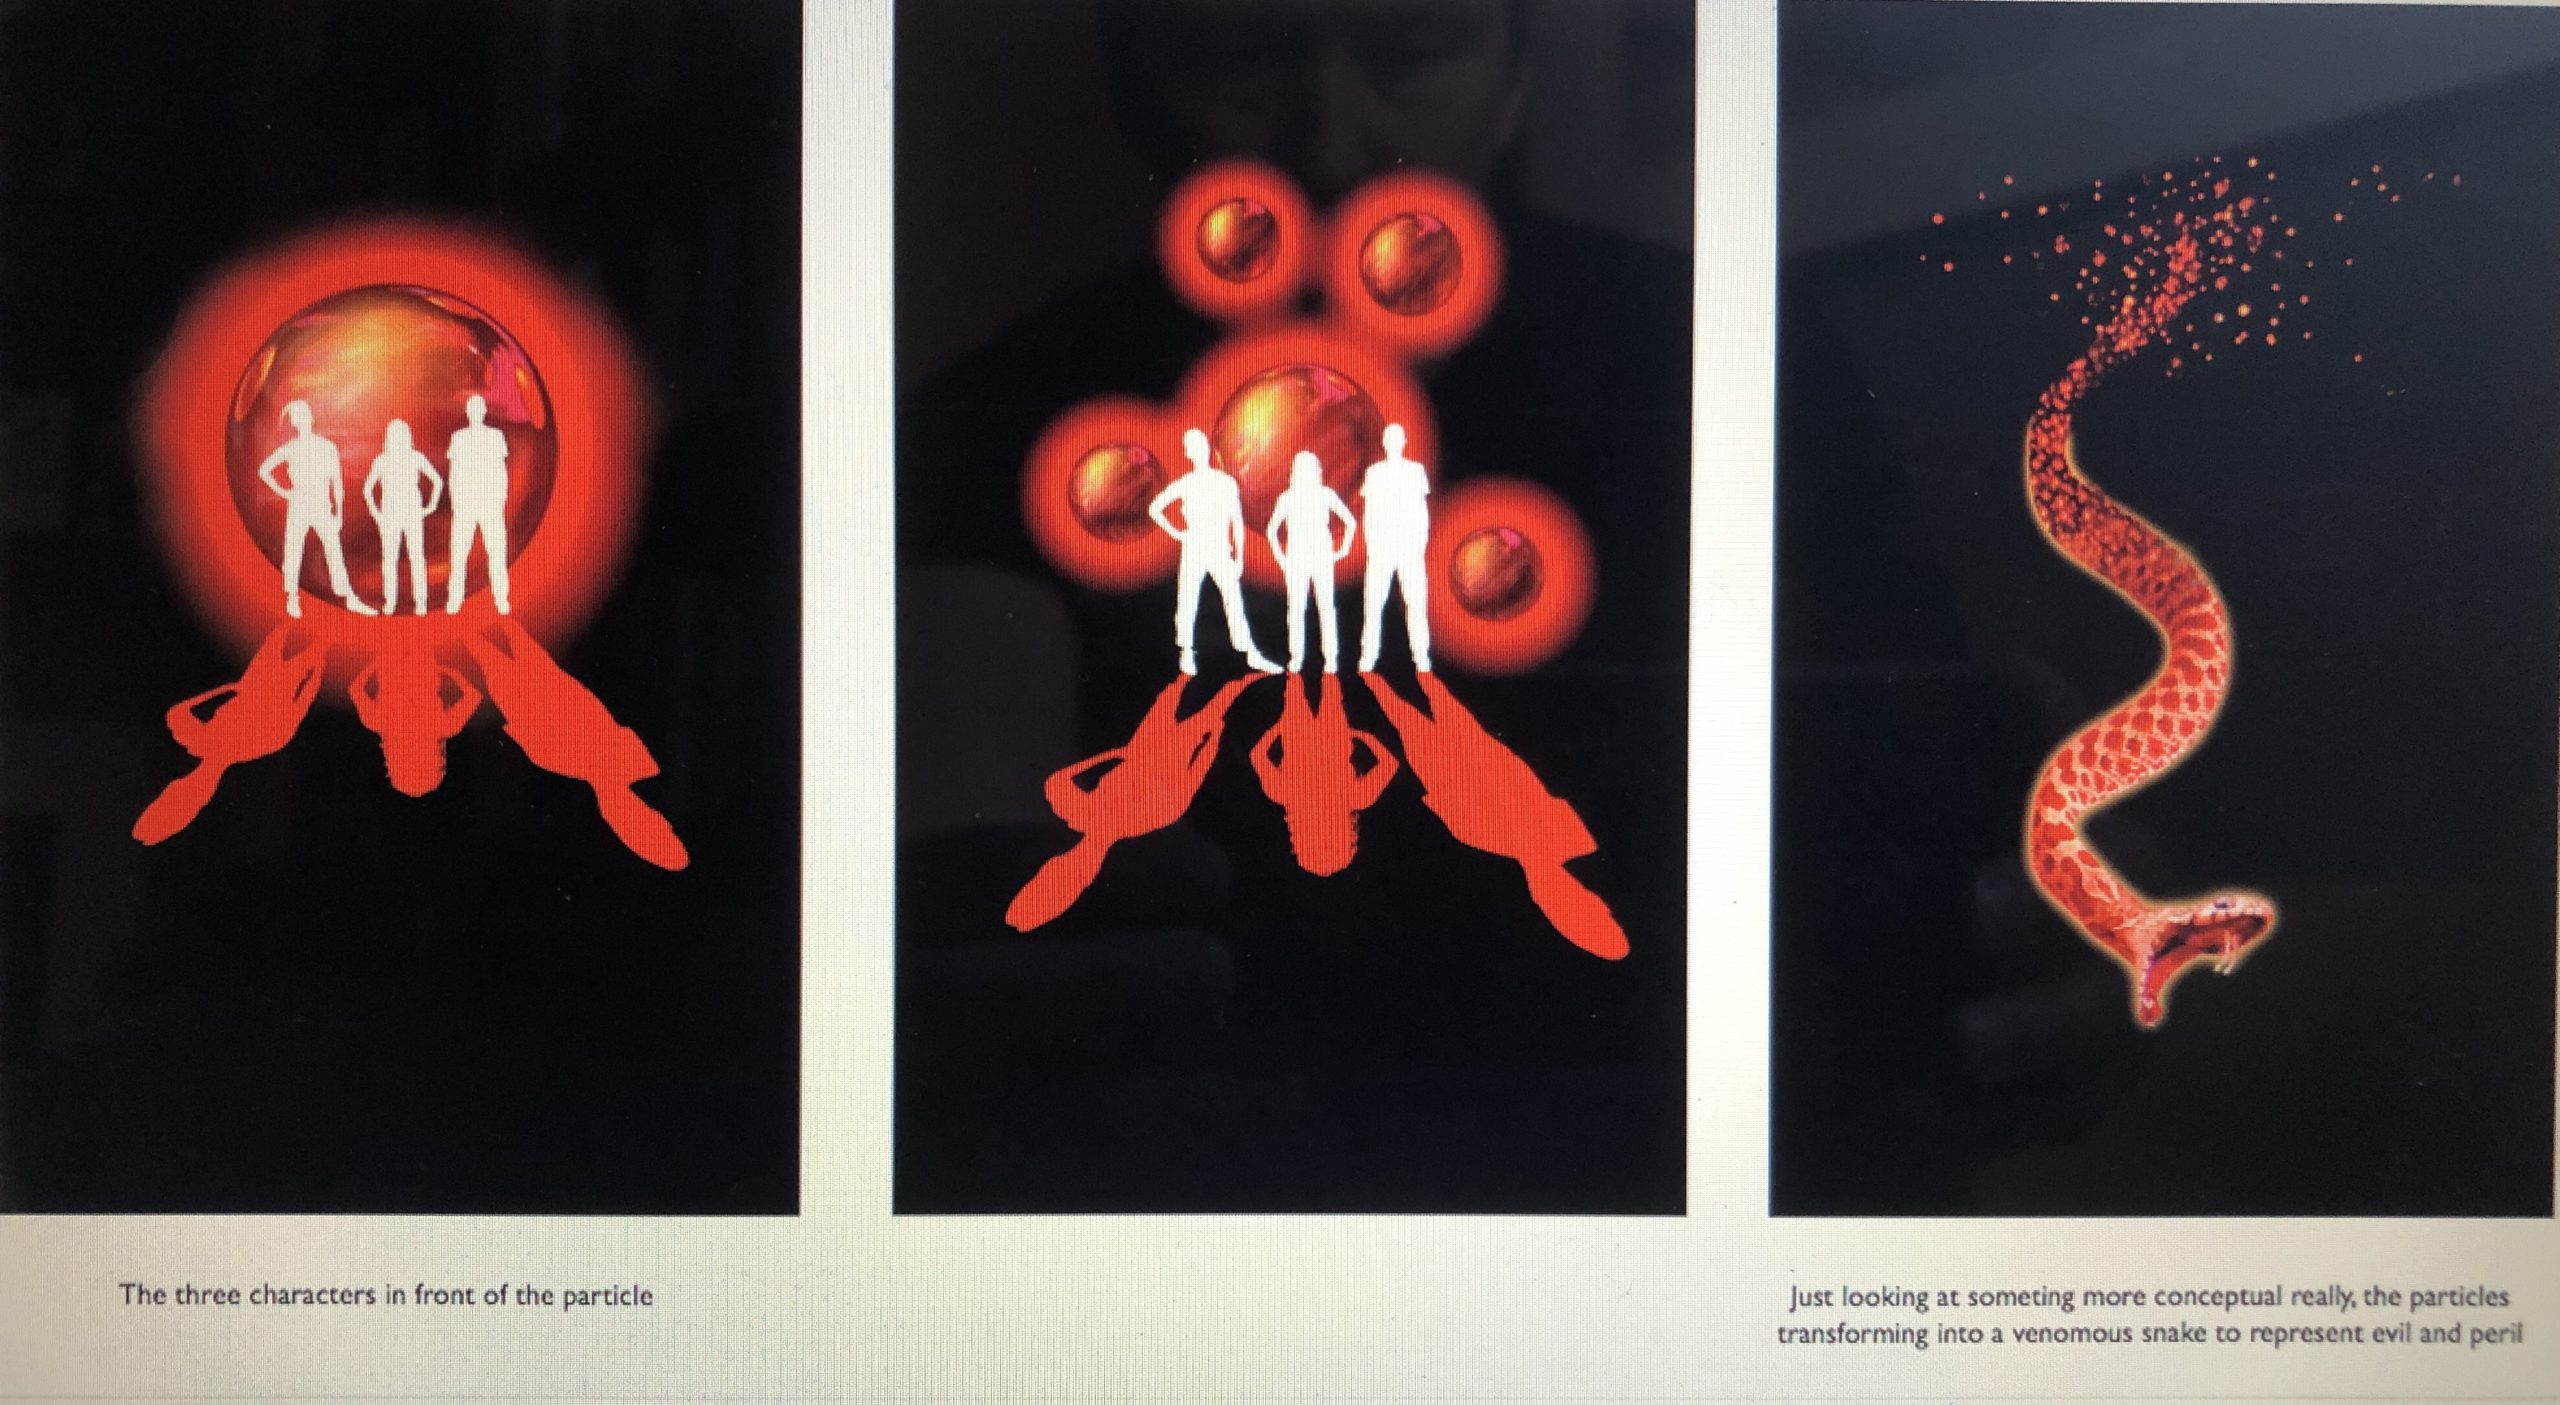 Three images with three figures, atoms, and a snake